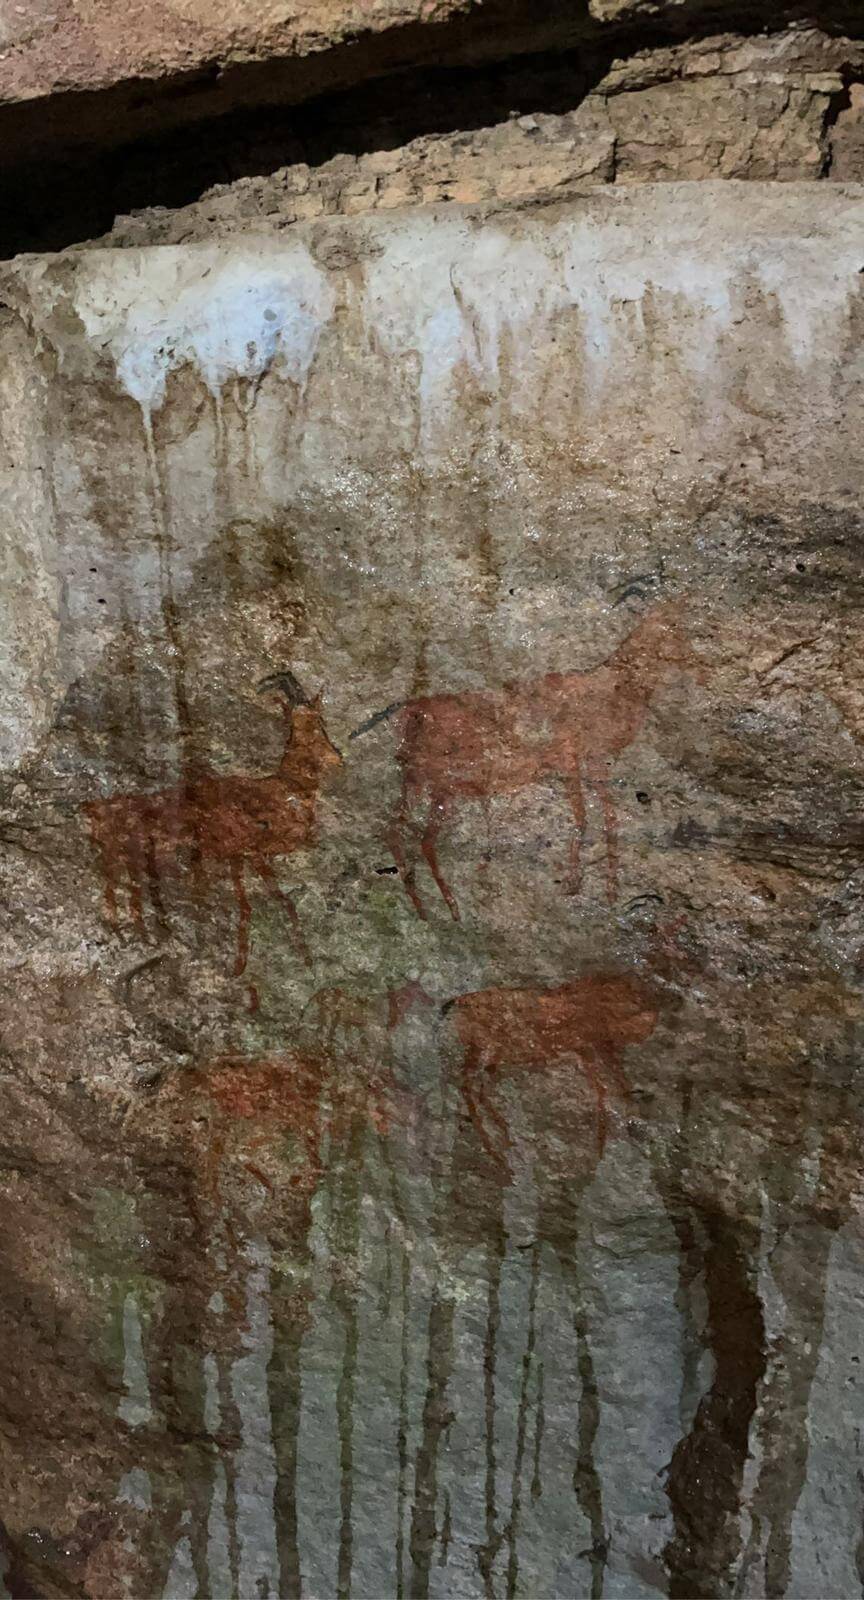 Rock art found in caves on Leobo Reserve